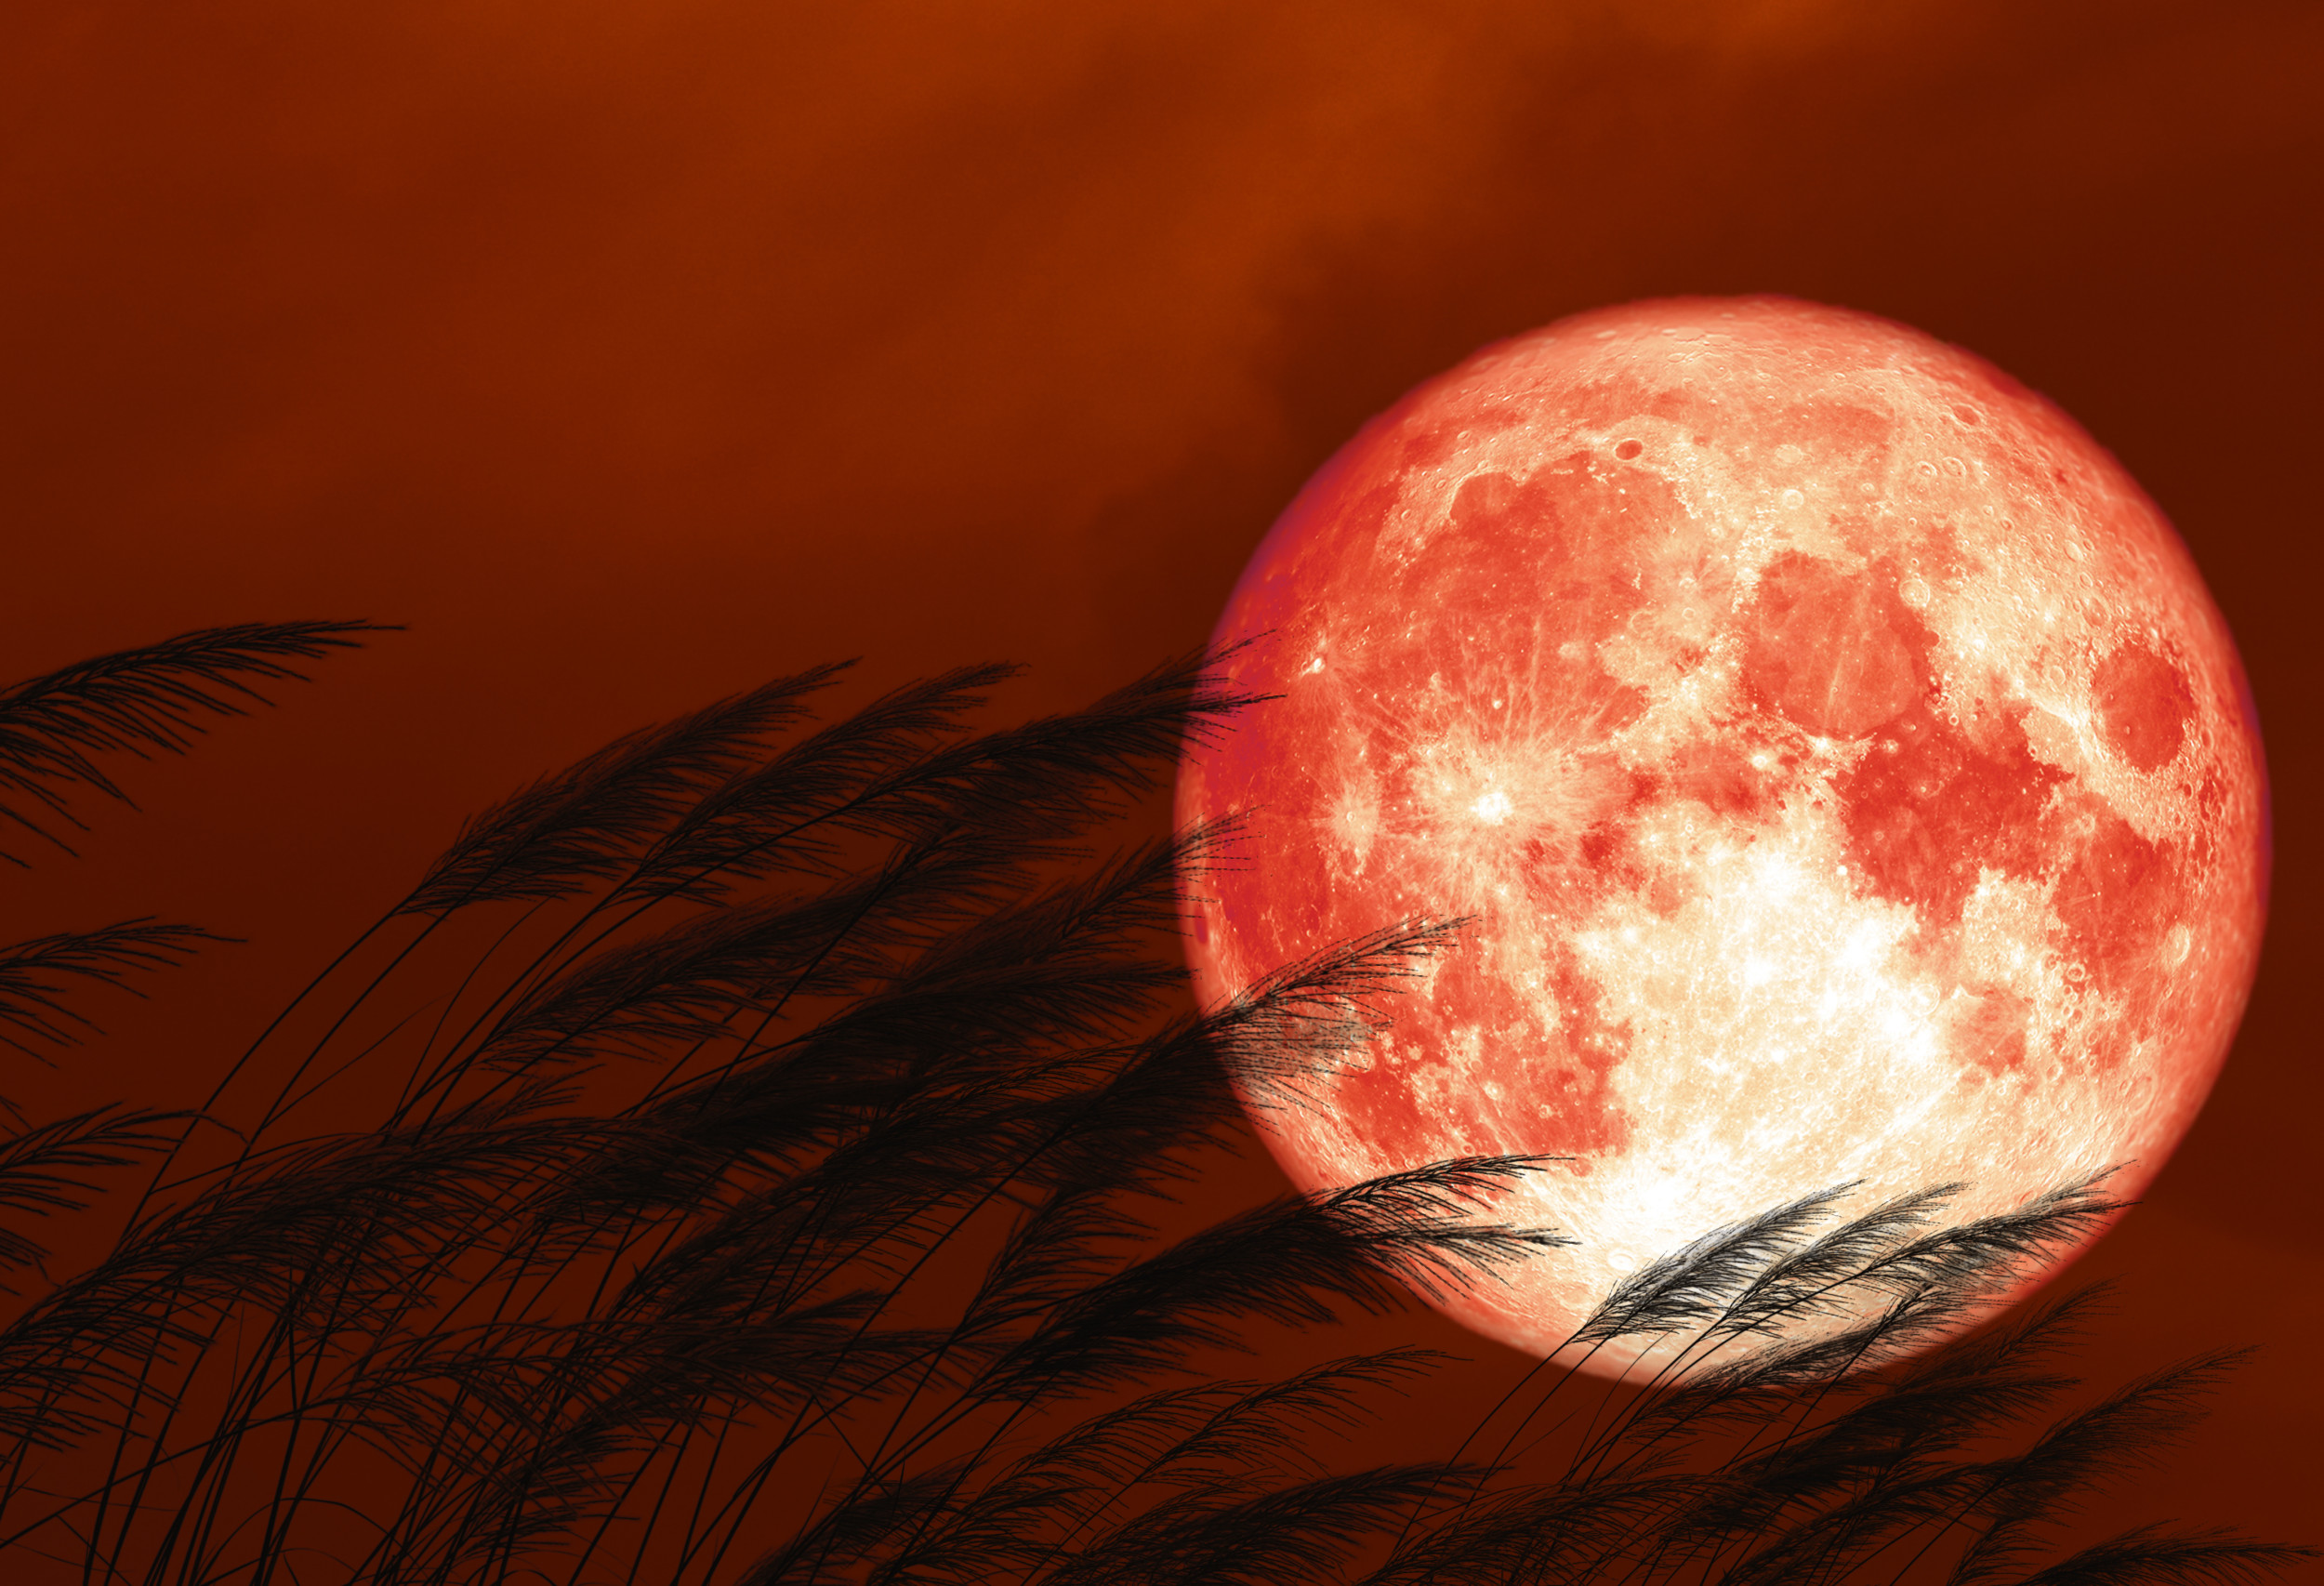 How This Weekend's Strawberry Moon Got Its Name